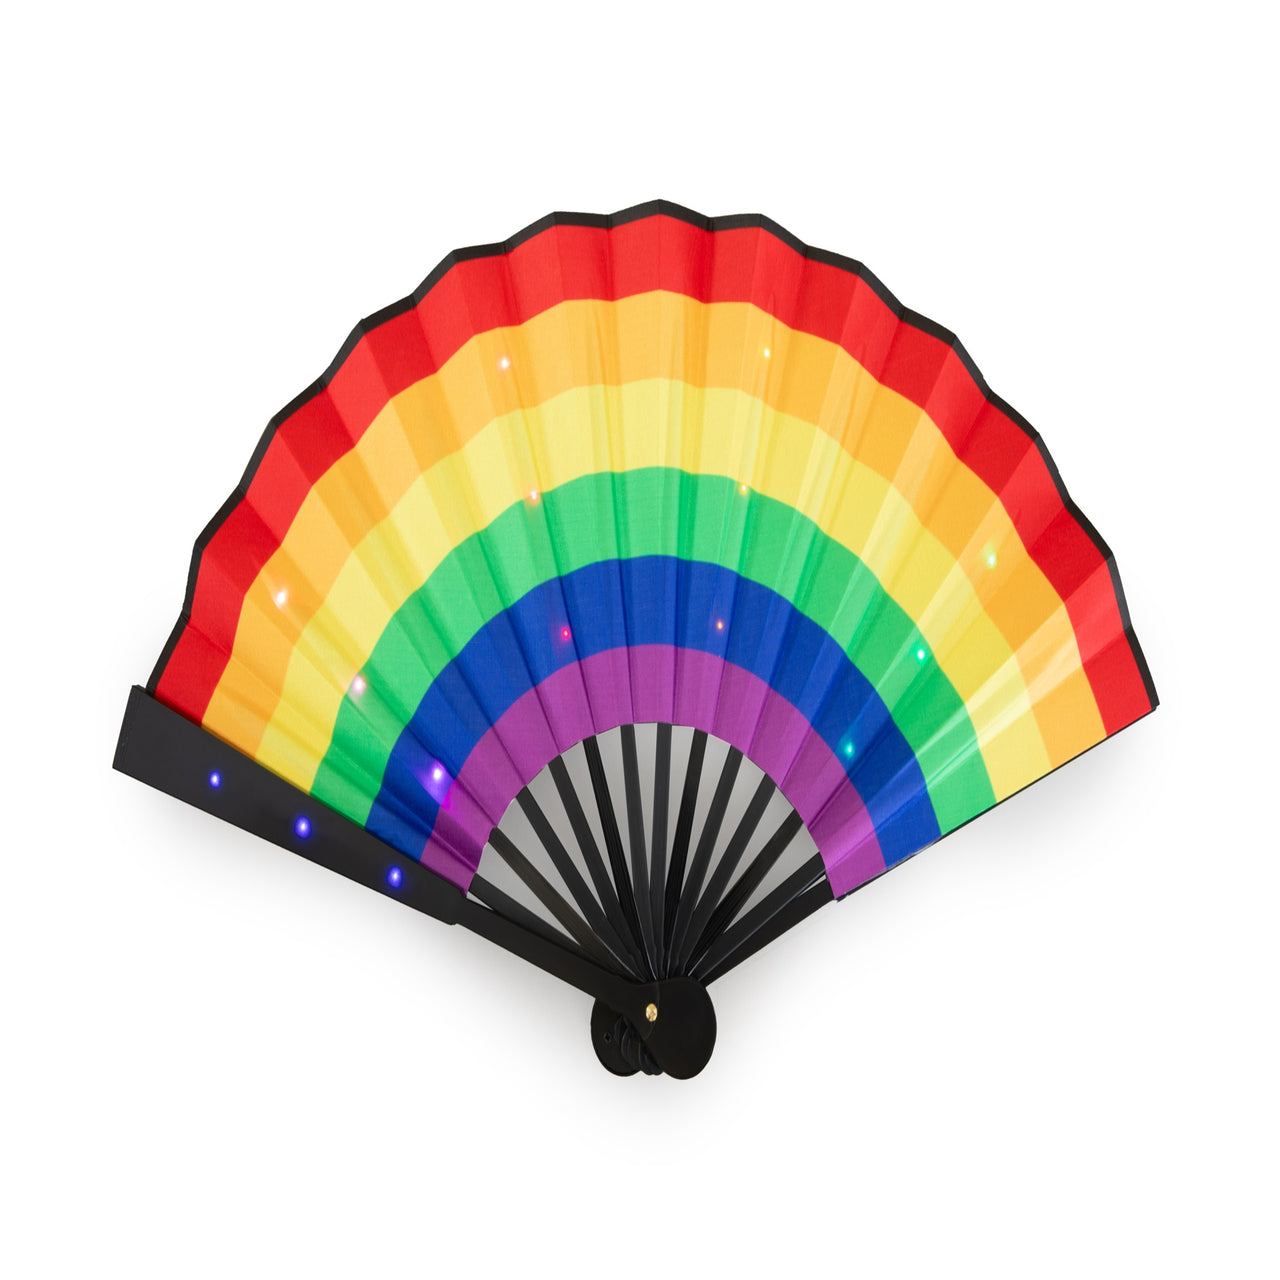 LED Hand Fan - "Rainbow Pride" Show Your Pride at Events, Concerts and Festivals with our Foldable LED Hand Fan